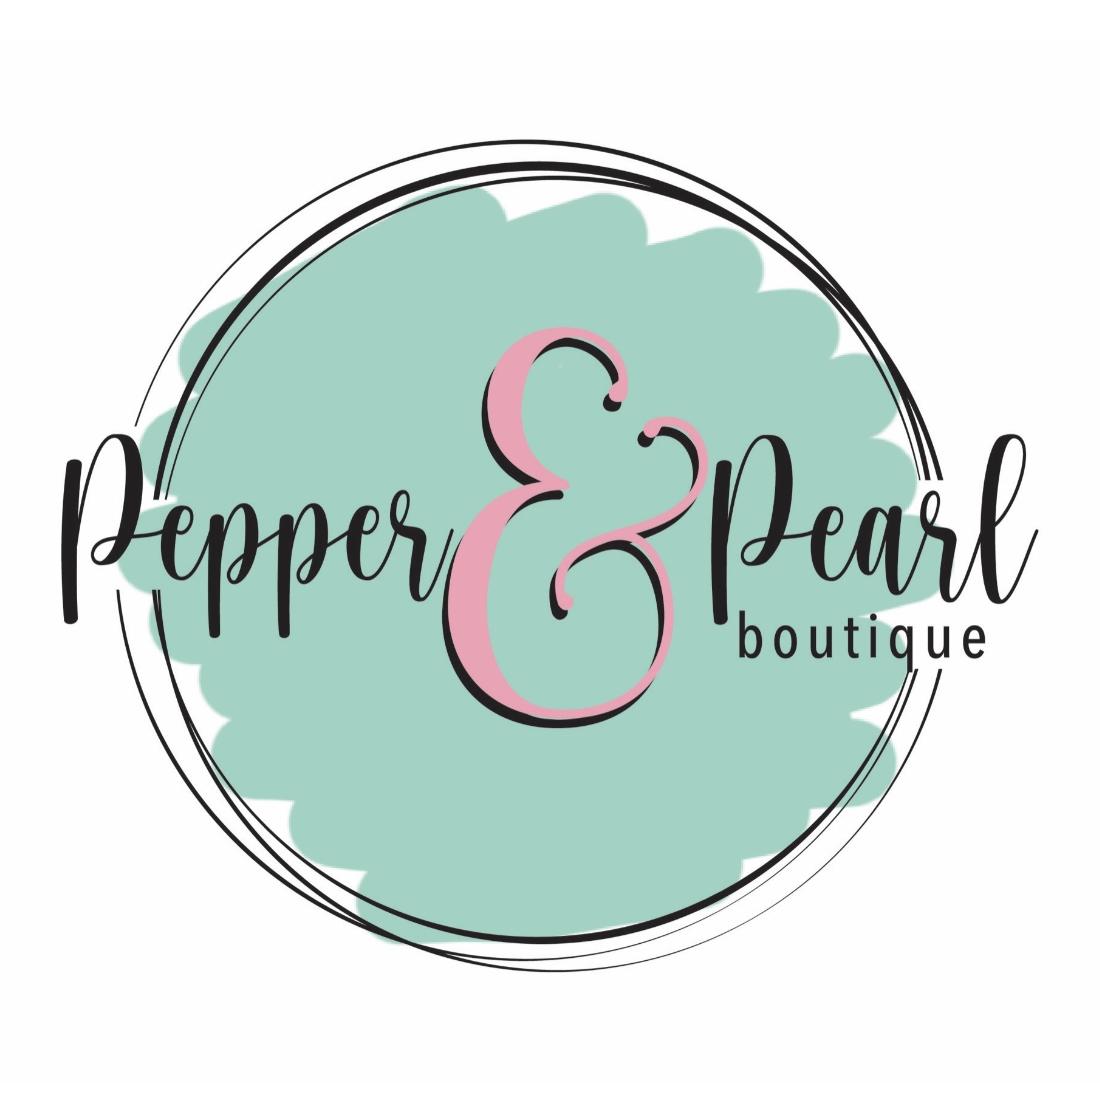 Pepper & Pearl's images